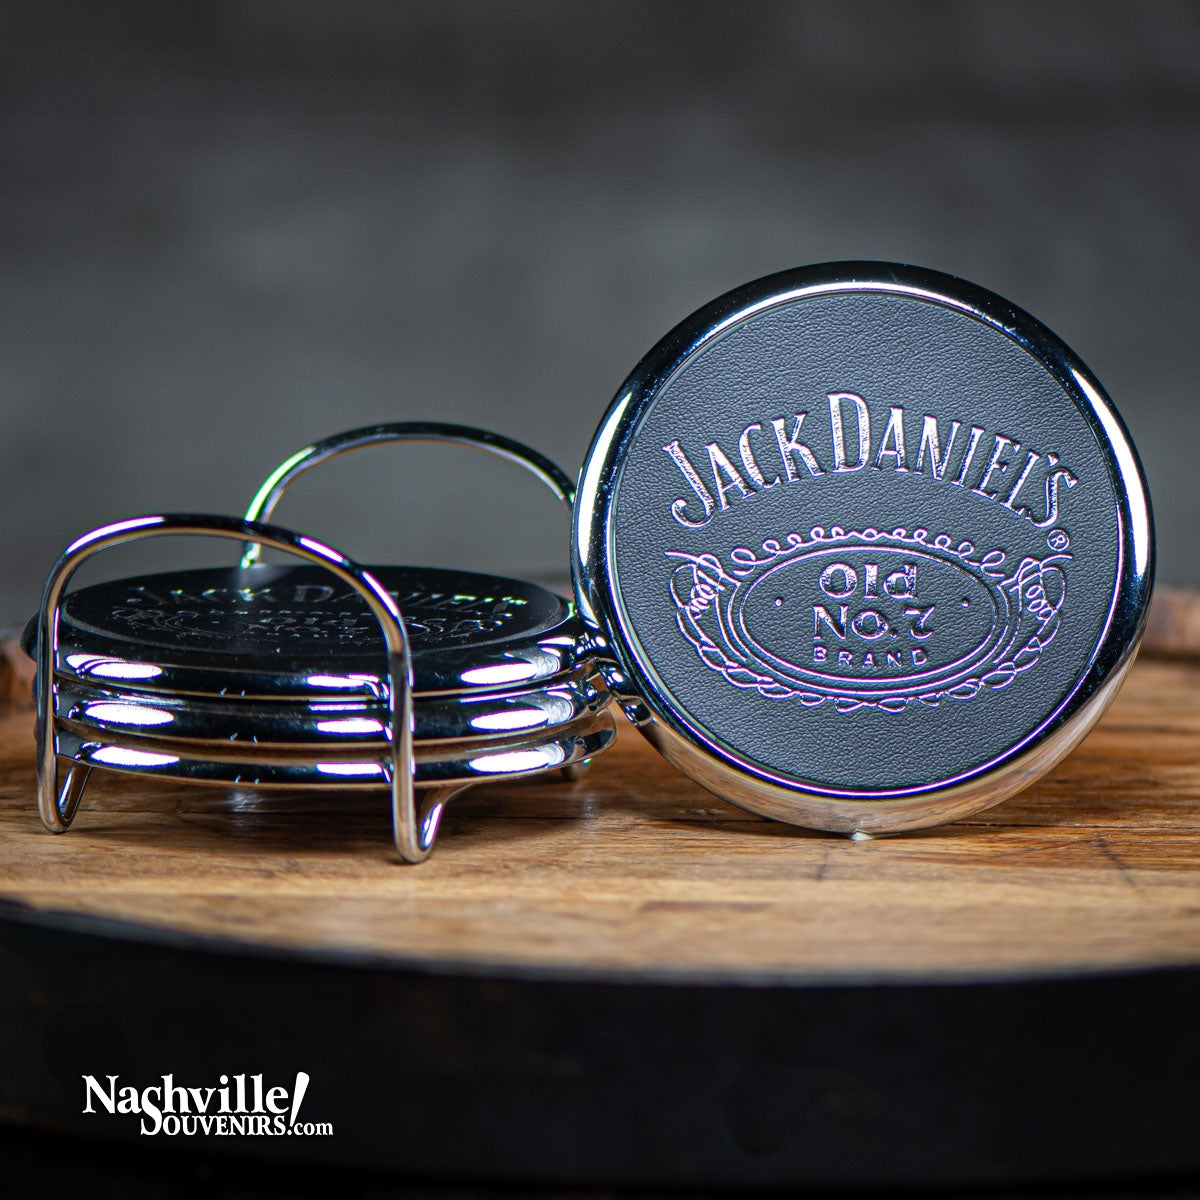 Park your whiskey glass on one of these great die cast chrome vintage Jack Daniel's coasters. A Jack Daniel's coaster set containing four heavy chrome coasters featuring the Jack Daniel's logo and Old No.7 Brand in the center.